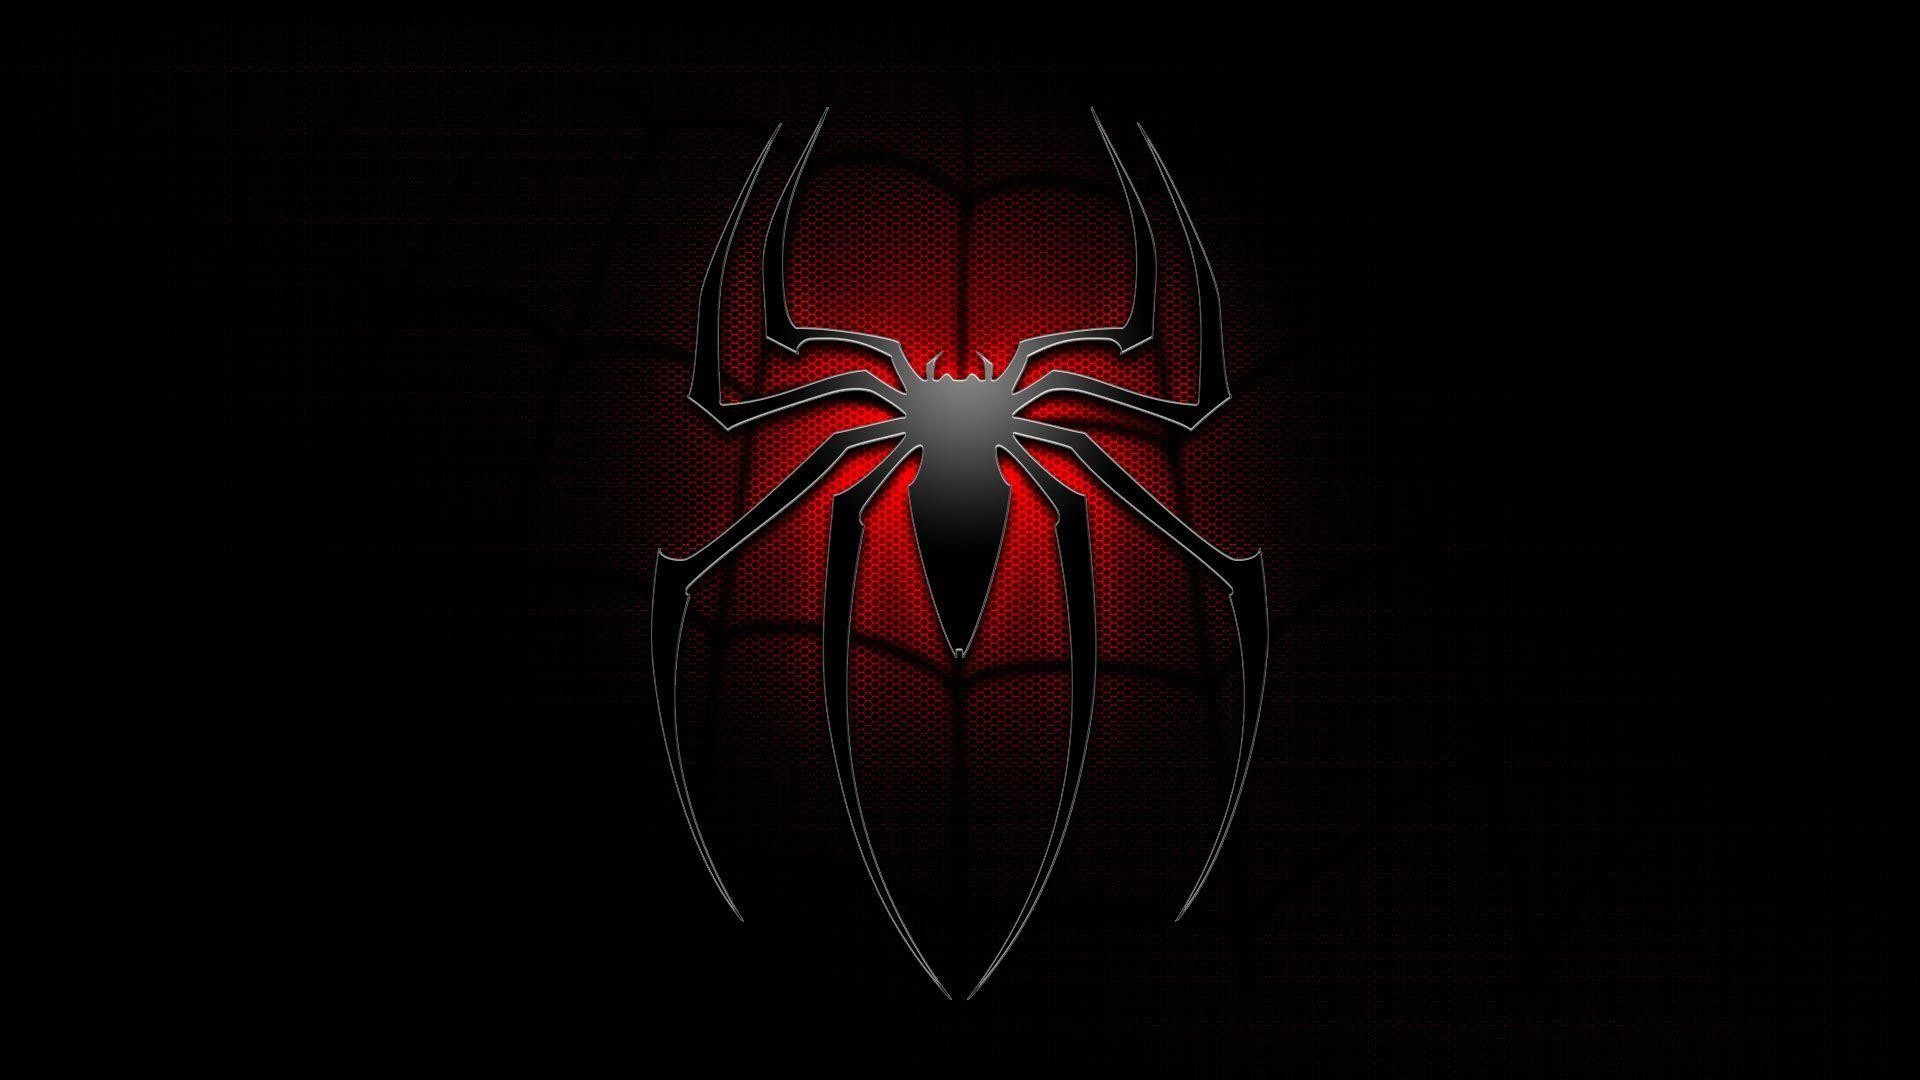 The Amazing Spider Man 2 New Wallpapers  HD Wallpapers  ID 13297